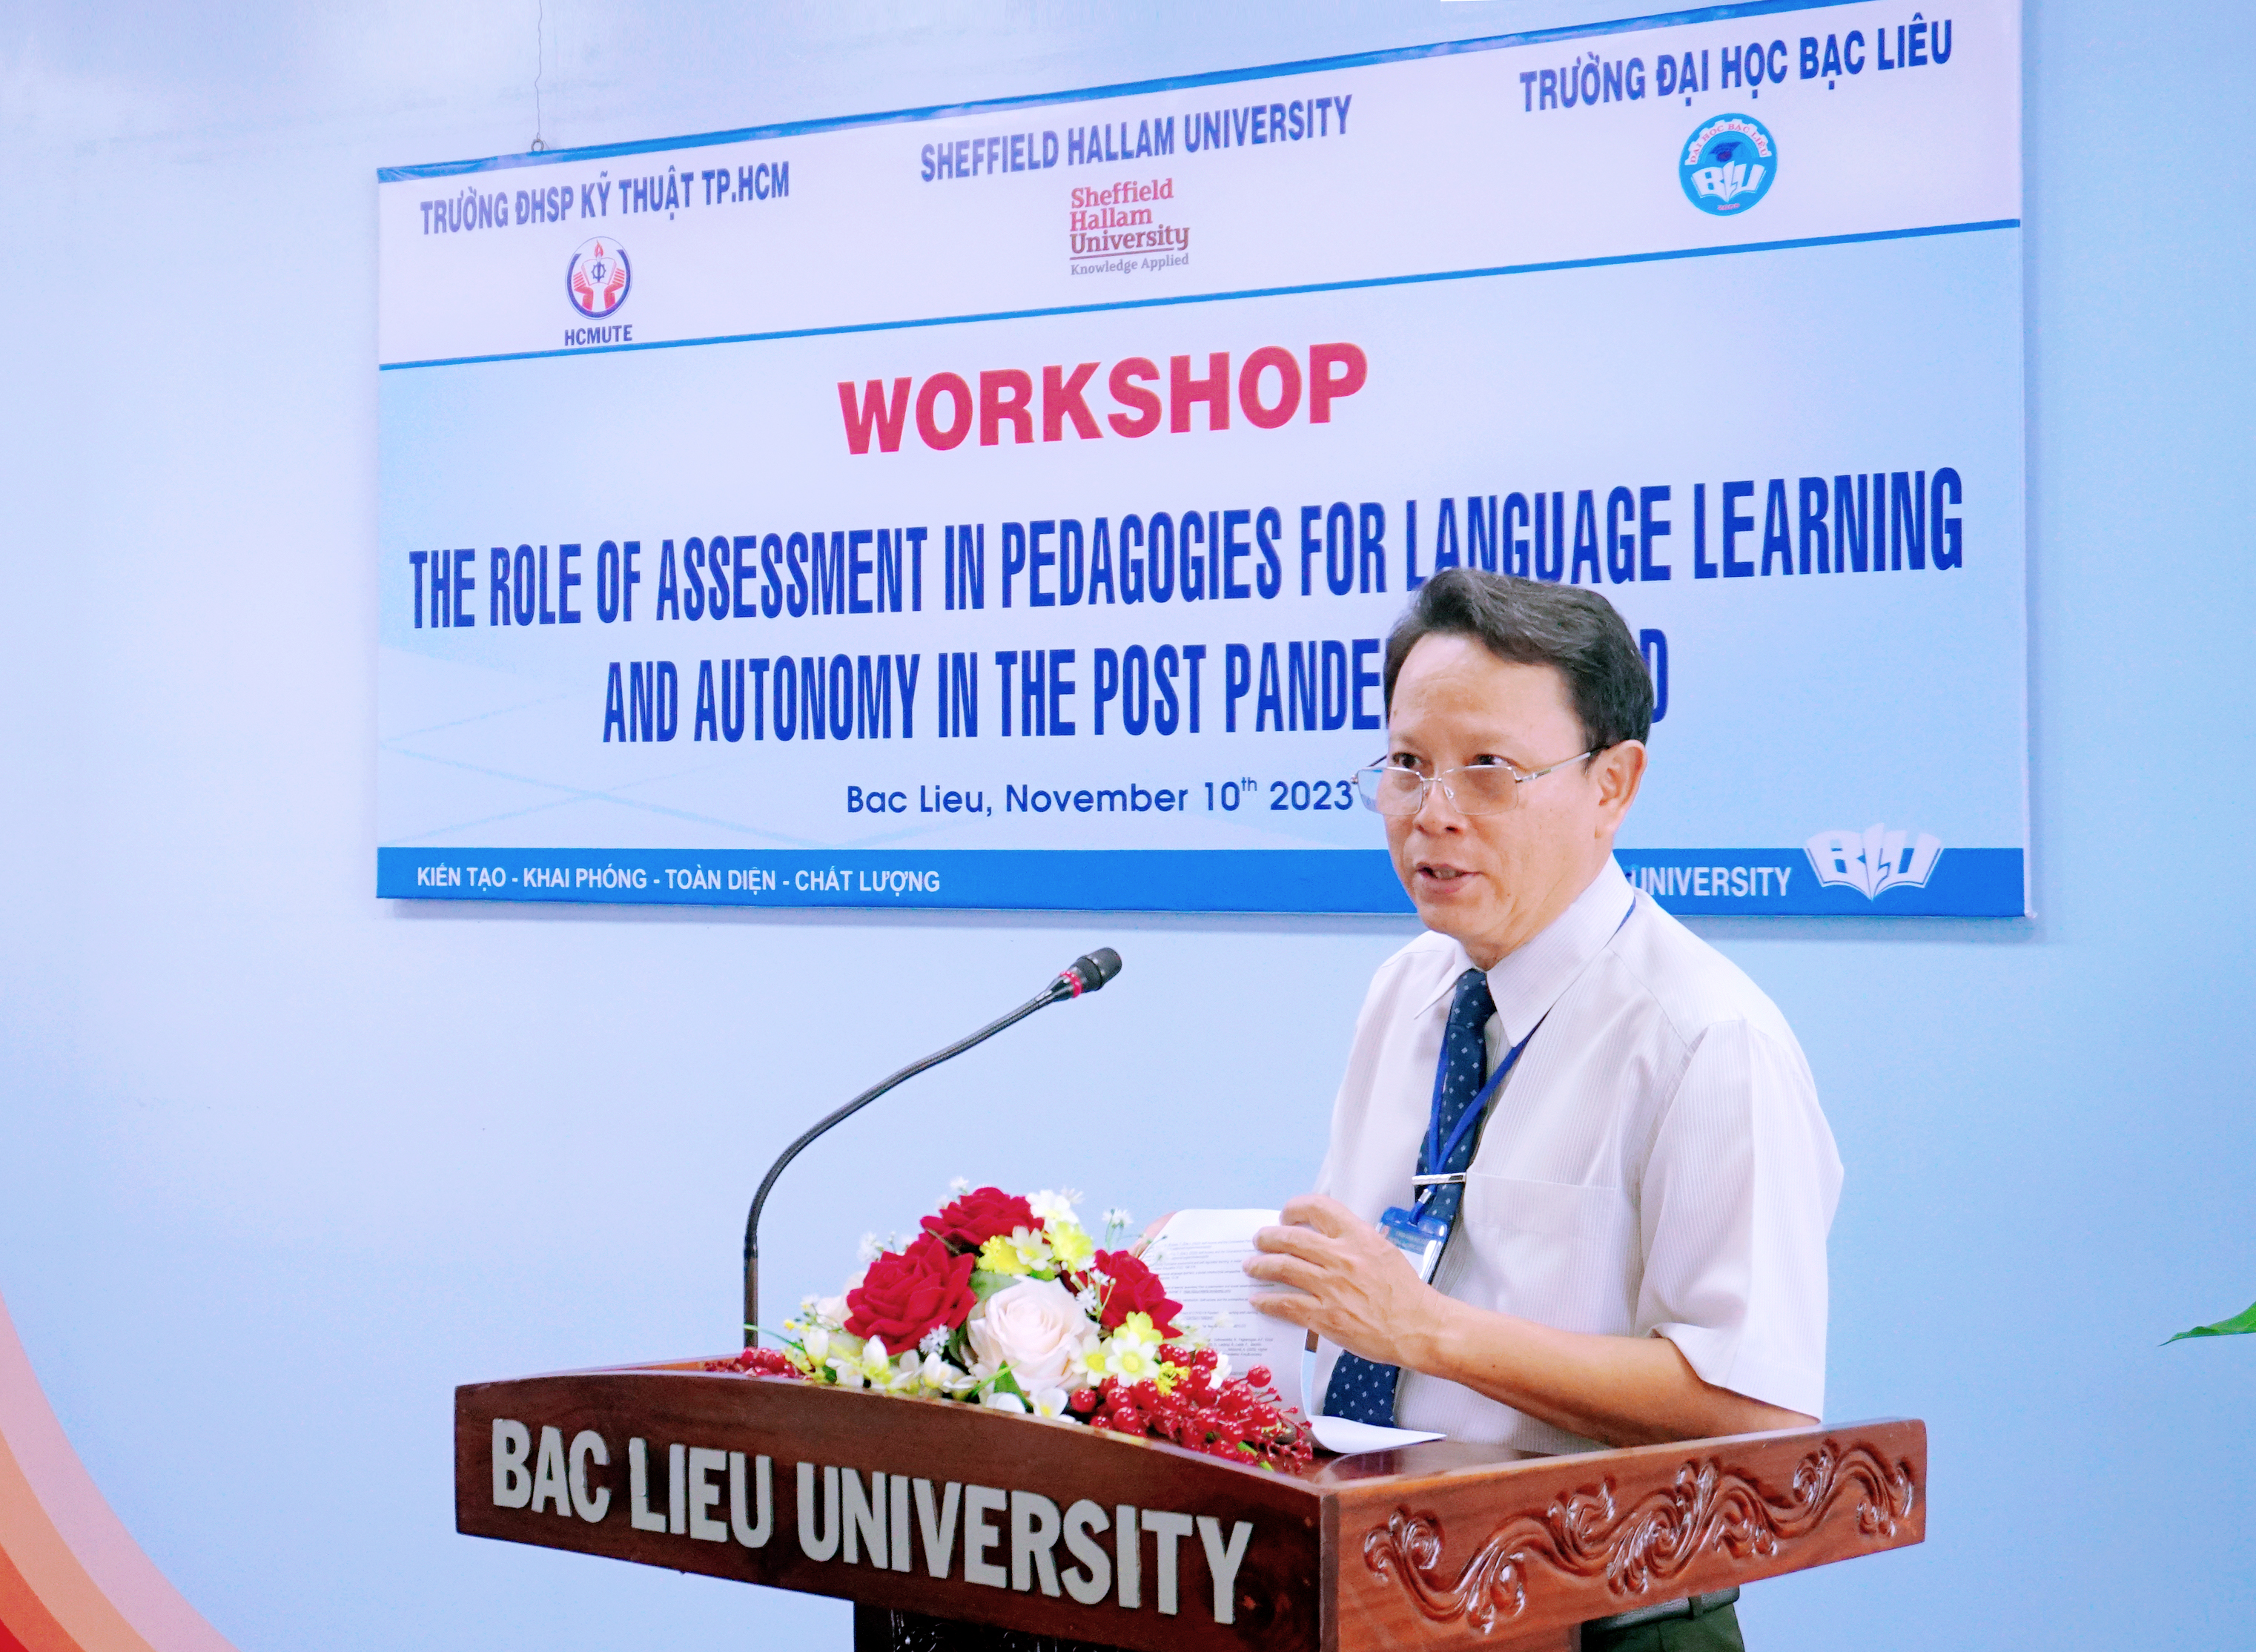 Bac Lieu University coordinated to organize an educational seminar and welcome educational experts from Sheffield Hallam University, England and Ho Chi Minh City University of Technical Education.